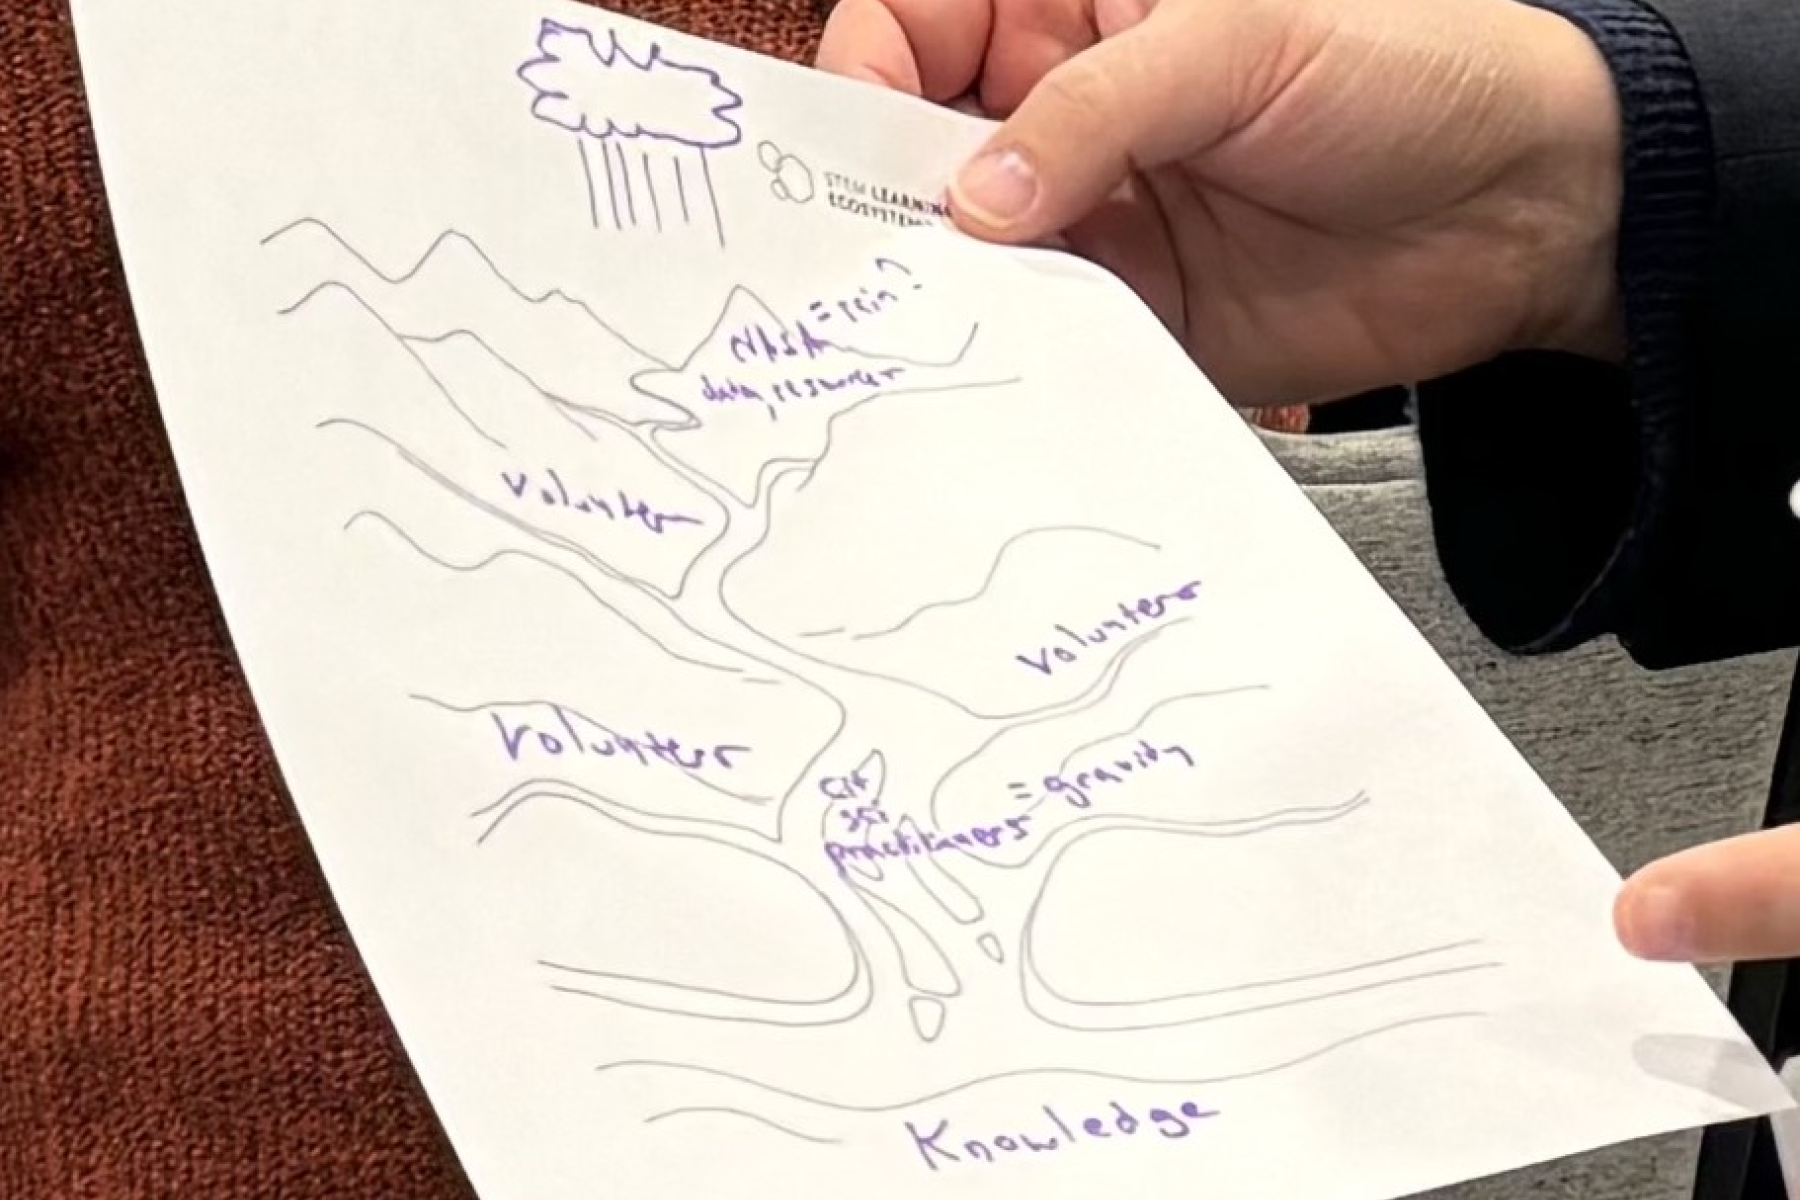 STEM Learning Ecosystems drawing activity of a watershed drawing template held by a person's hands